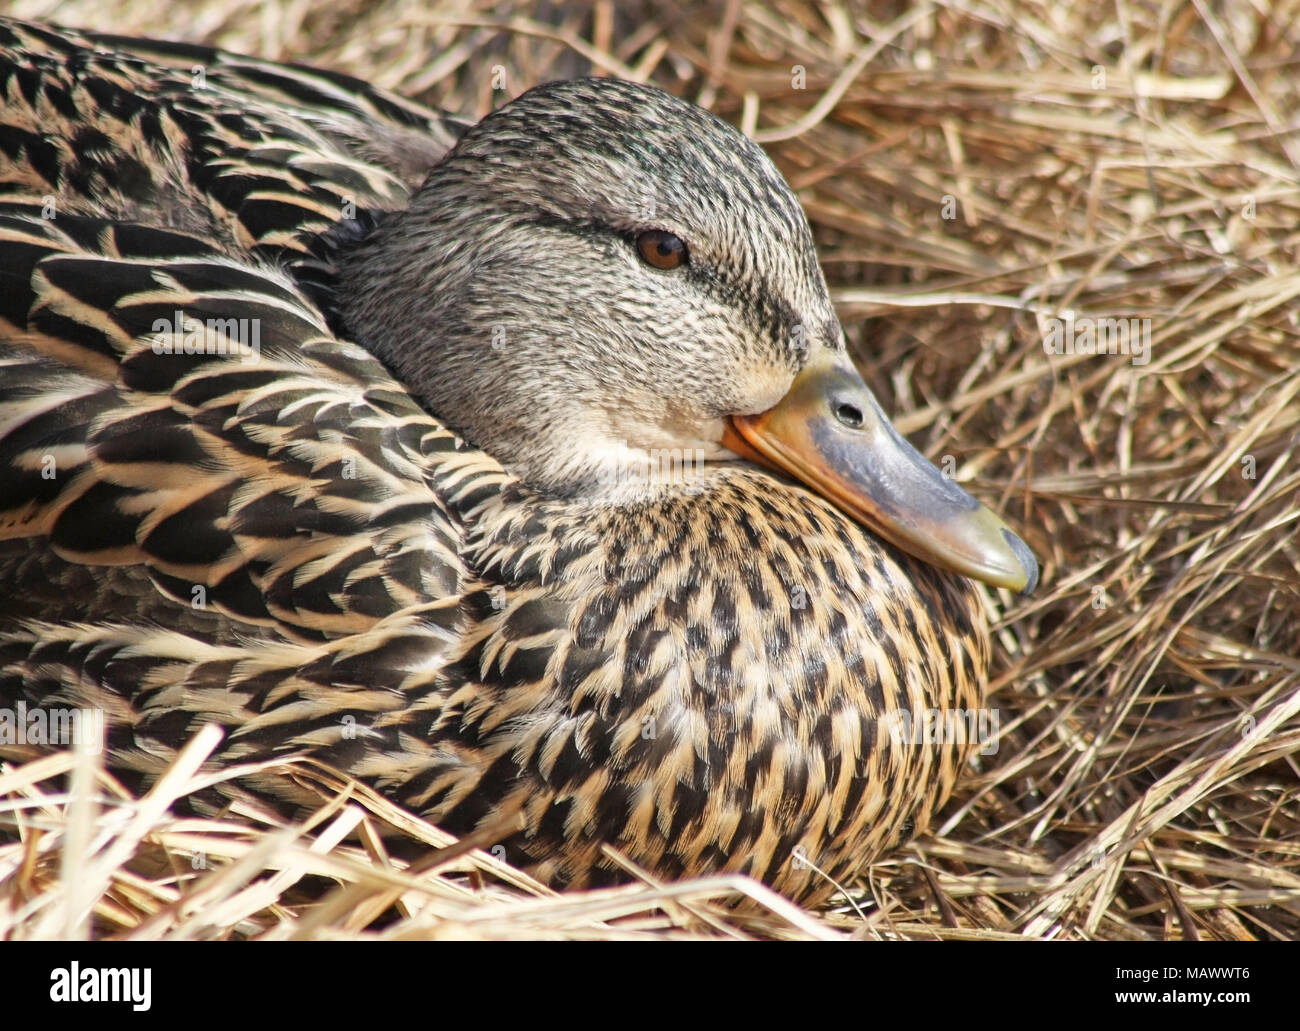 Nesting Mallard duck female laying in a nest of dried grasses Stock Photo